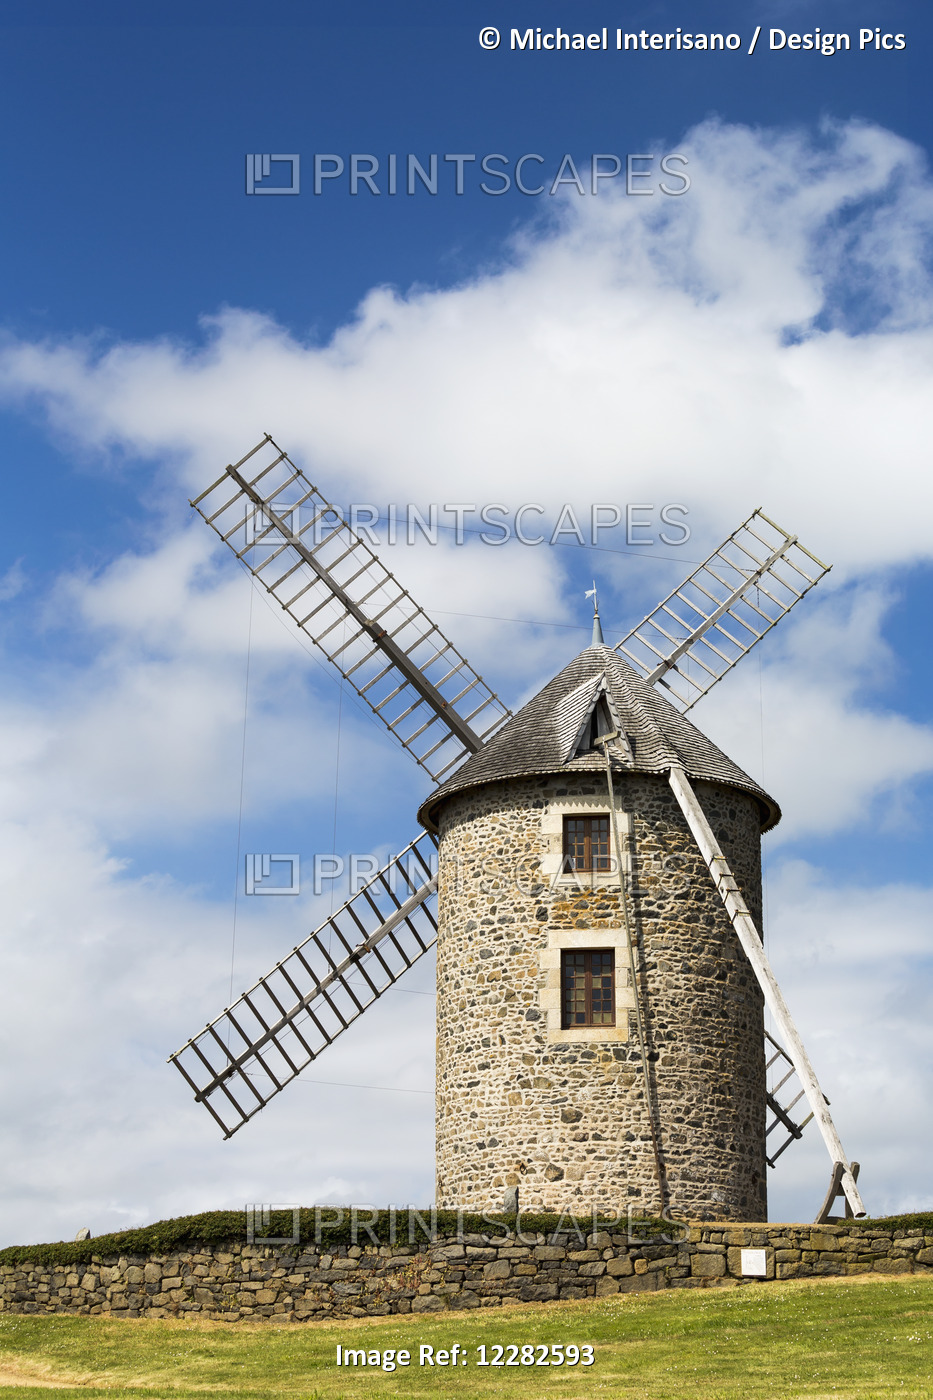 An Old Stone Windmill On A Hillside With Wooden Blades, Surrounded By A Stone ...